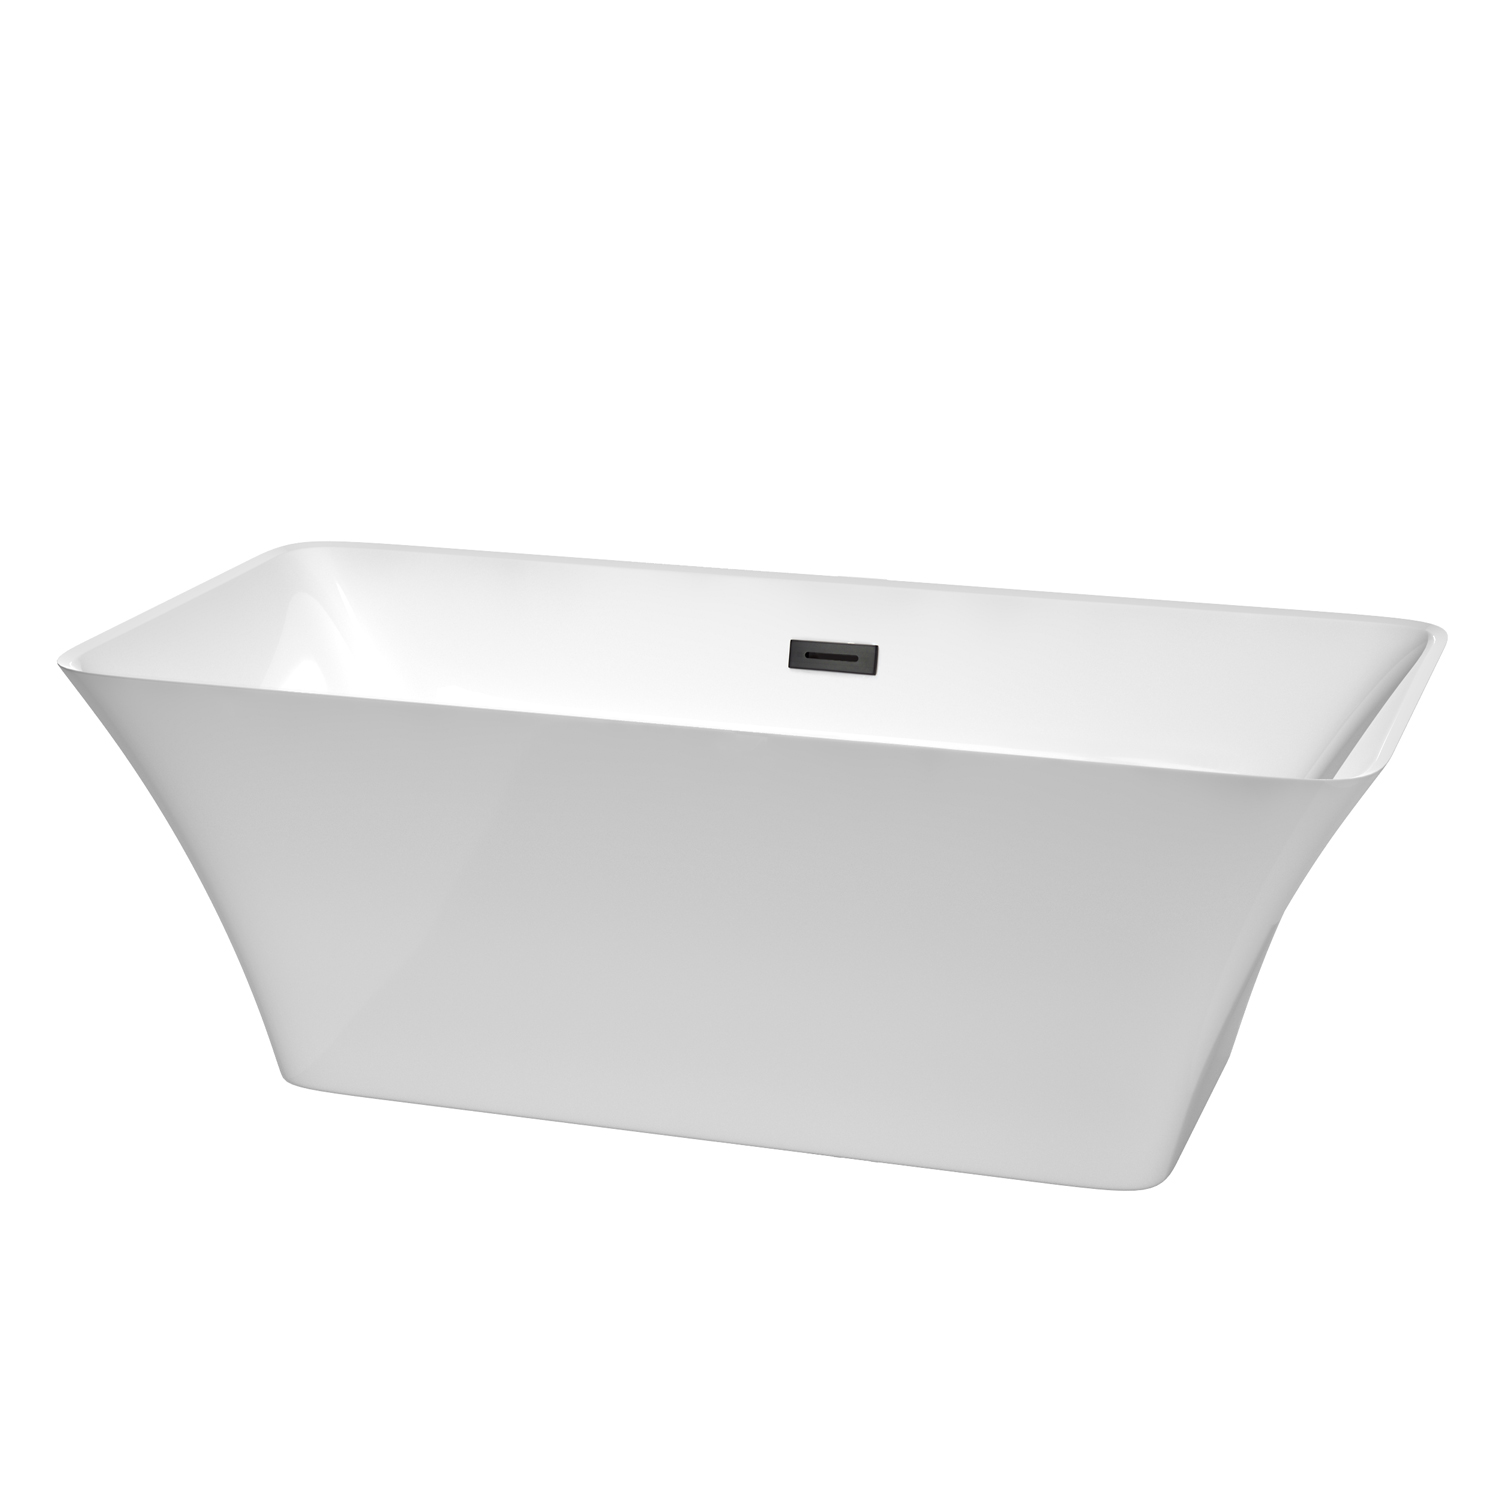 67" Freestanding Bathtub in White with Matte Black Pop-up Drain and Overflow Trim Finish